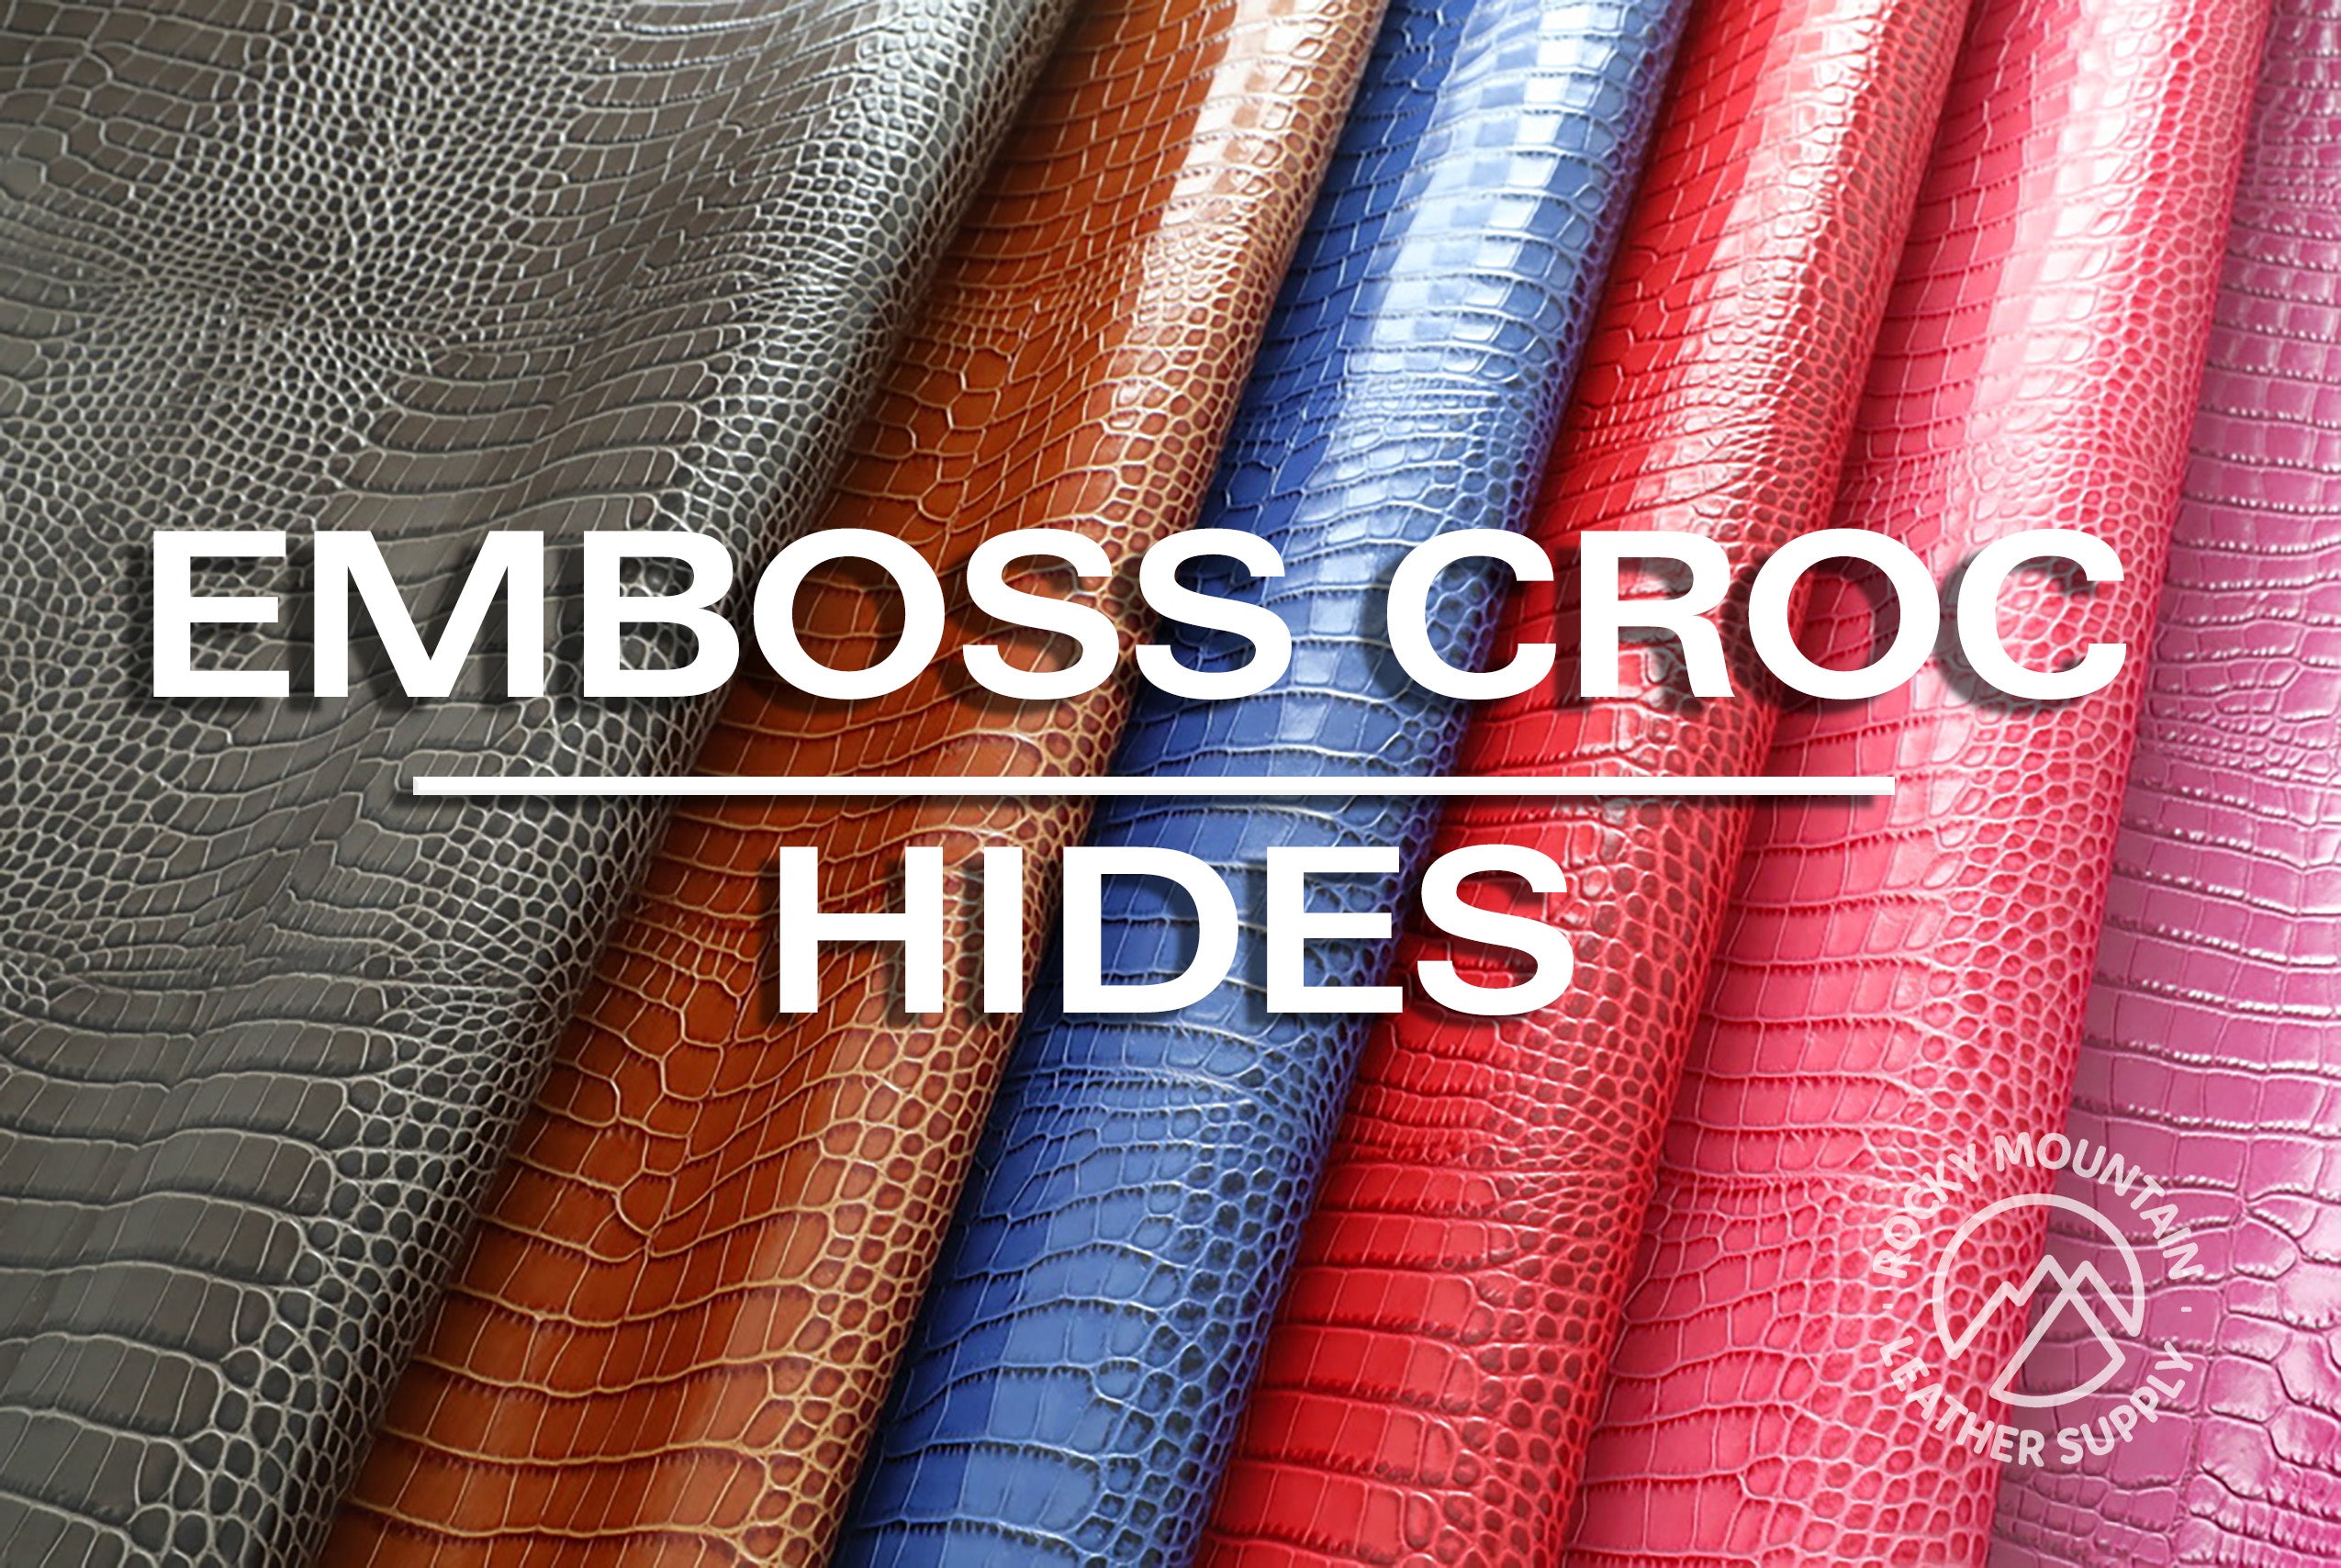 Crocodile Embossed Leather For Sale